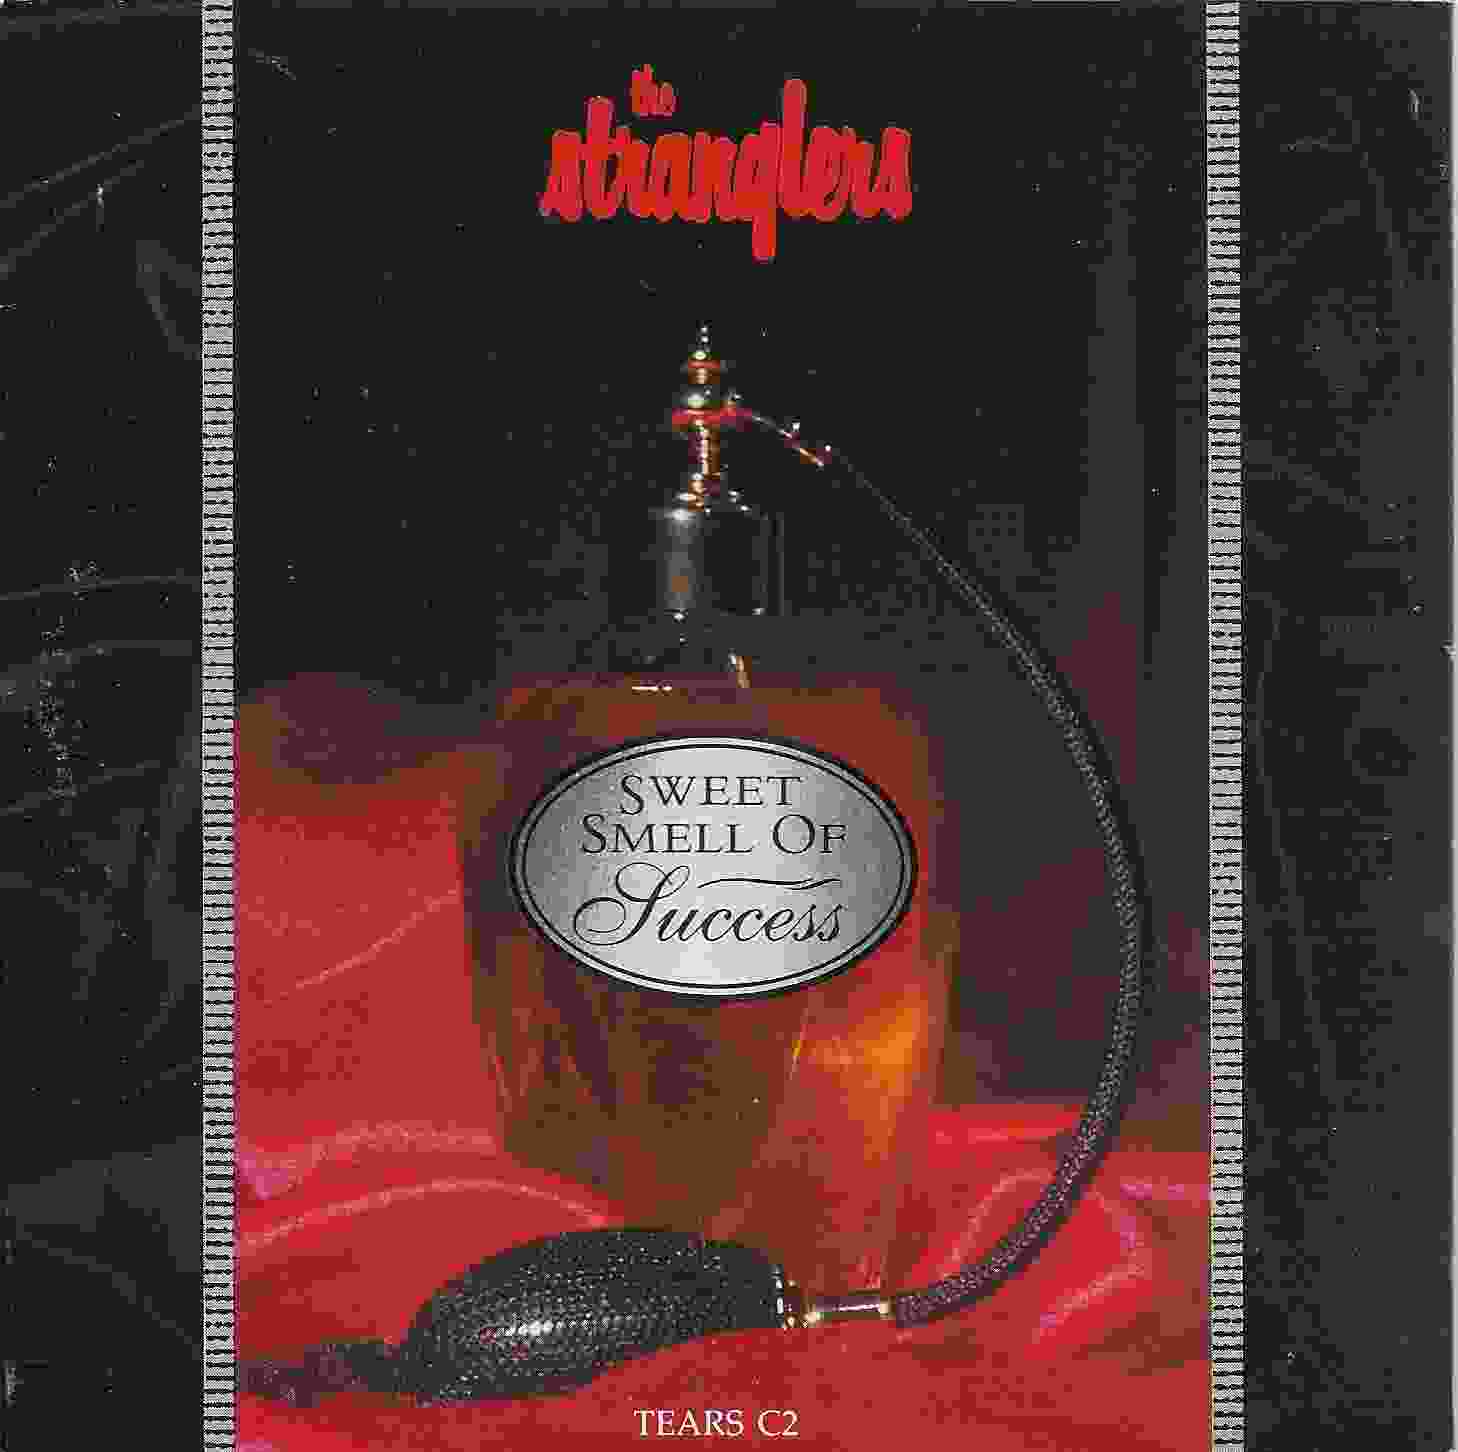 Picture of Sweet smell of success by artist The Stranglers from The Stranglers cdsingles